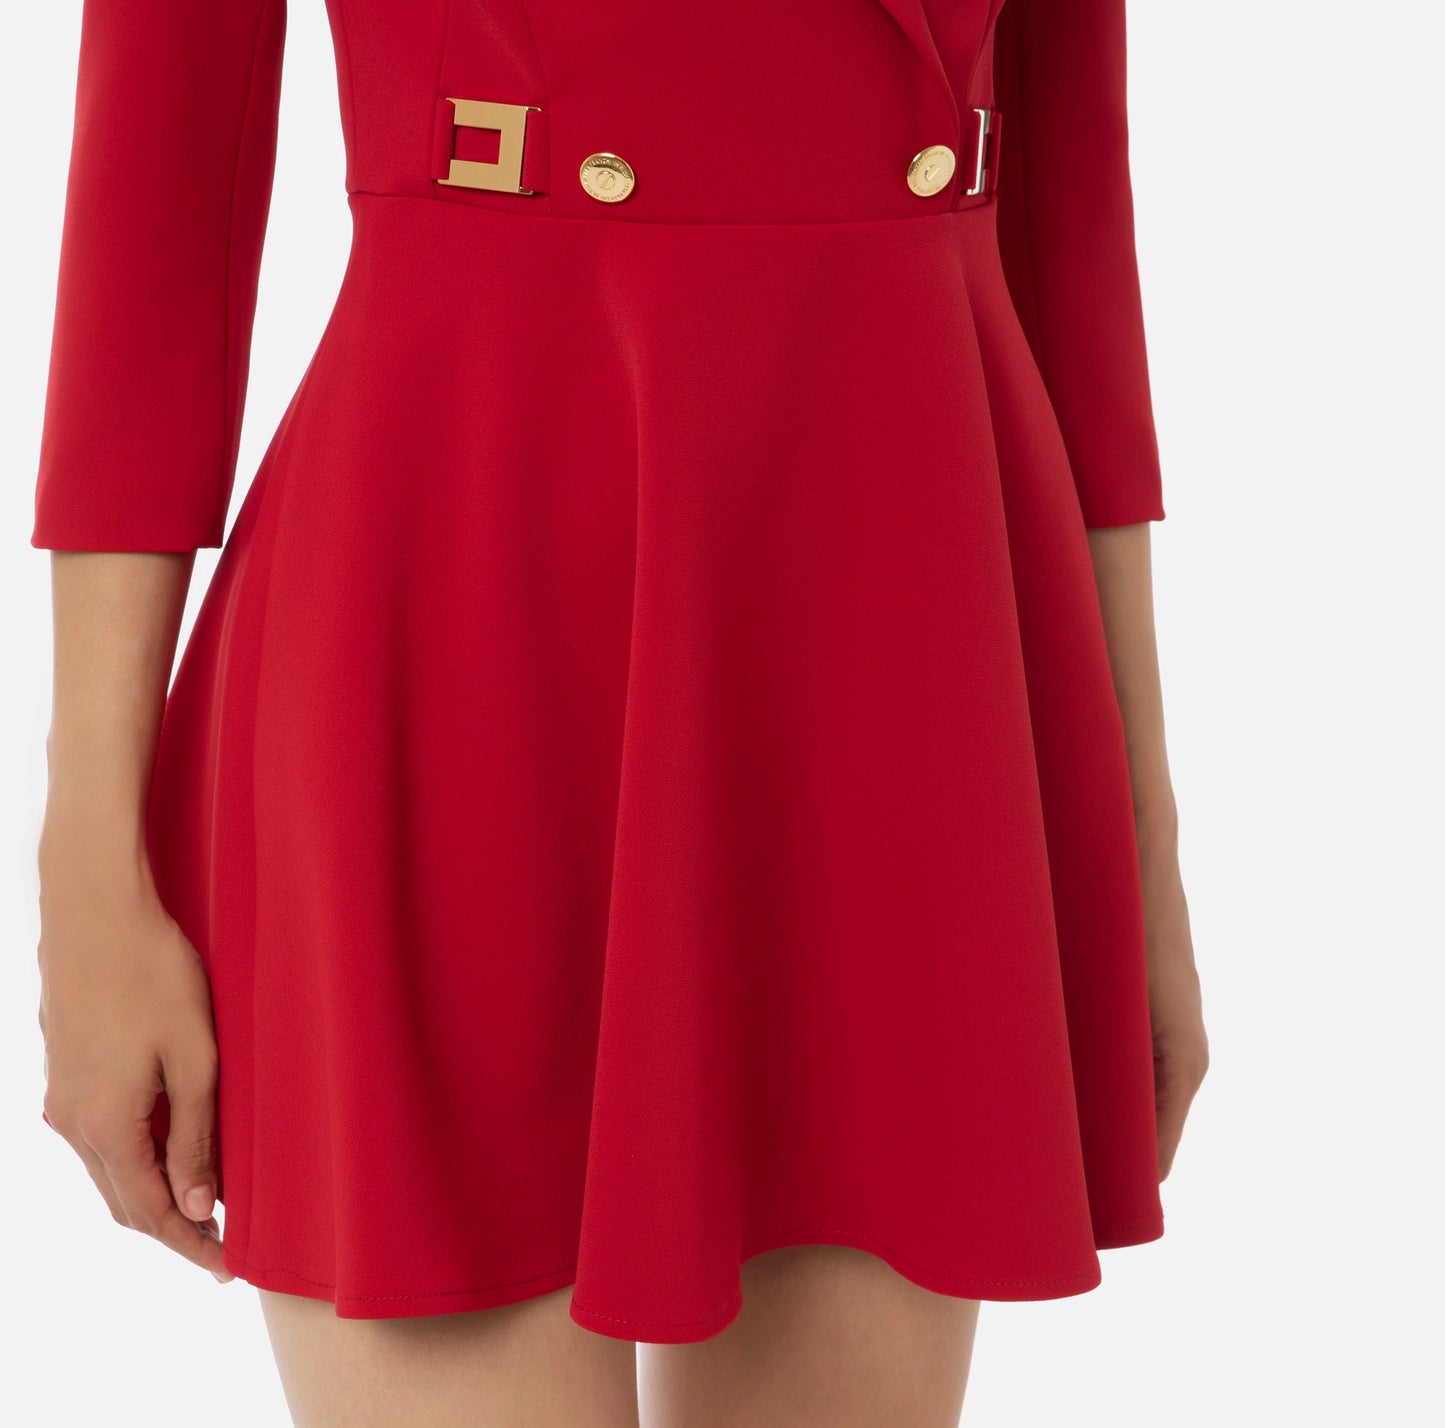 Coat dress in double layer crêpe fabric with gored skirt